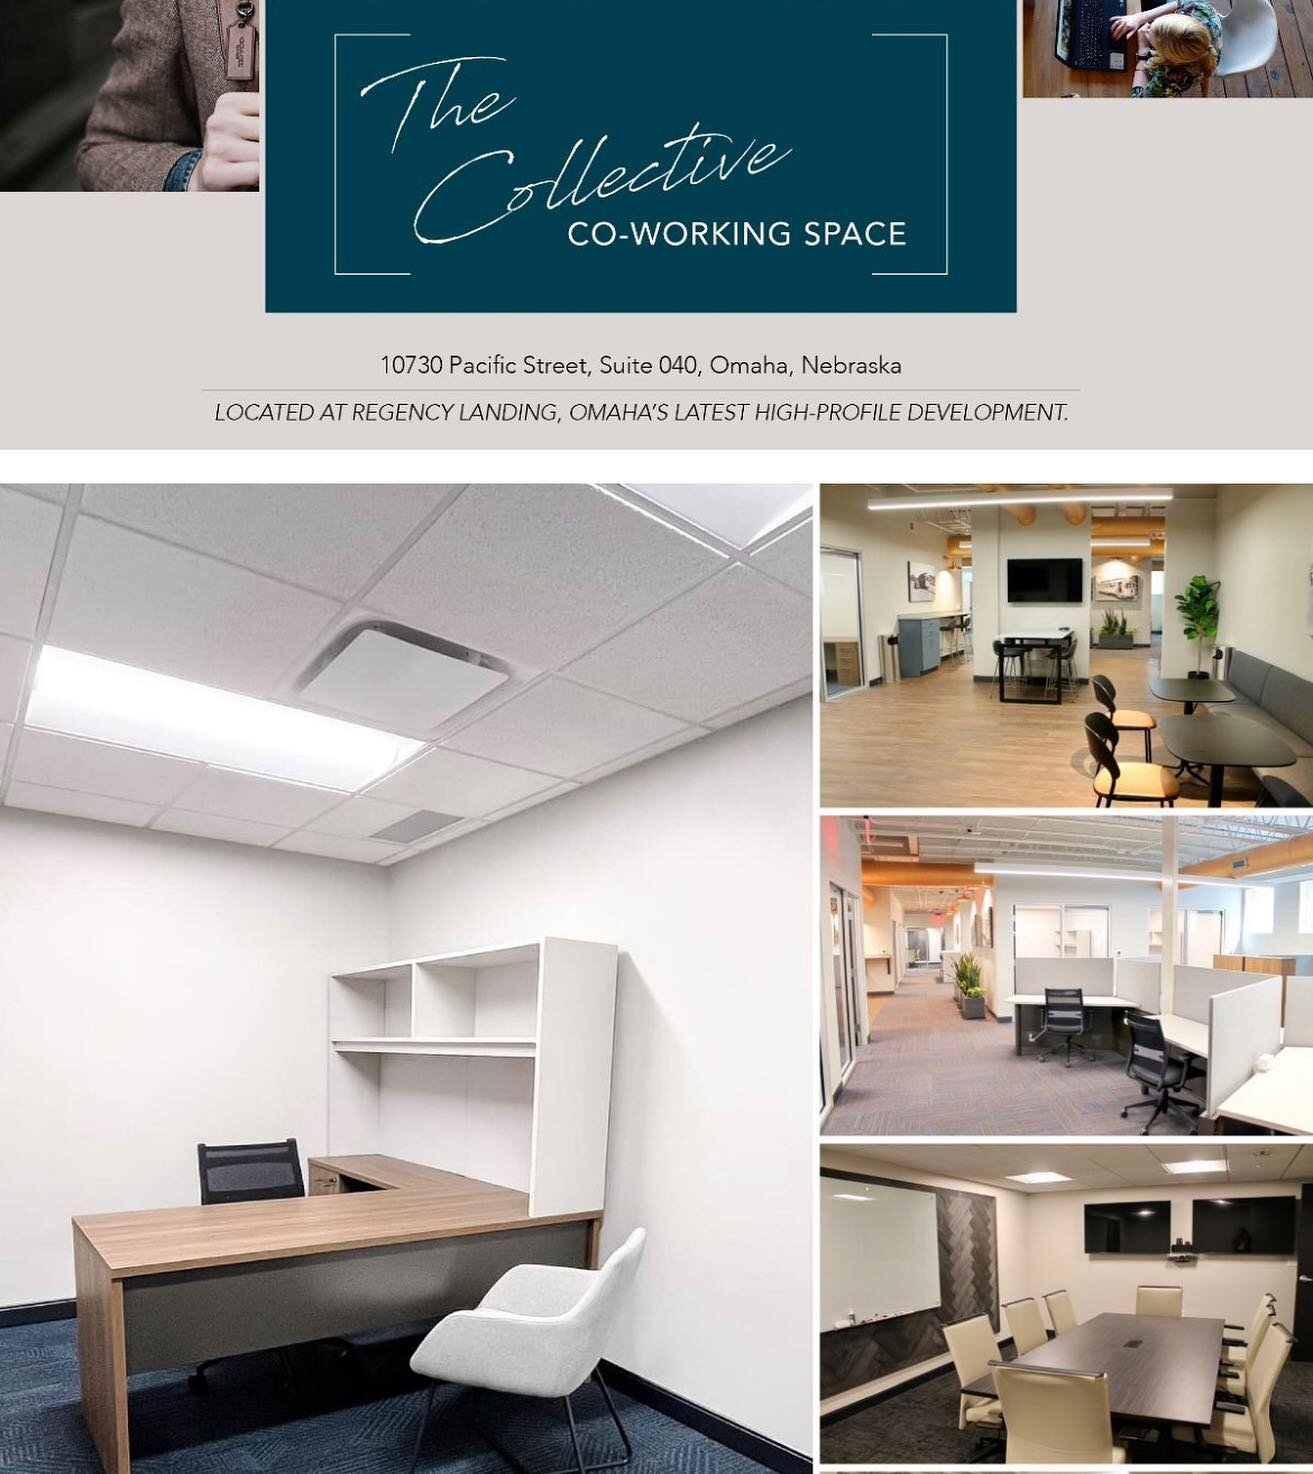 Come tour The Collective and find your new office space or a place to have your next meeting! 

@regencylanding #thecollective #coworking #coworkingomaha #officespaceomaha